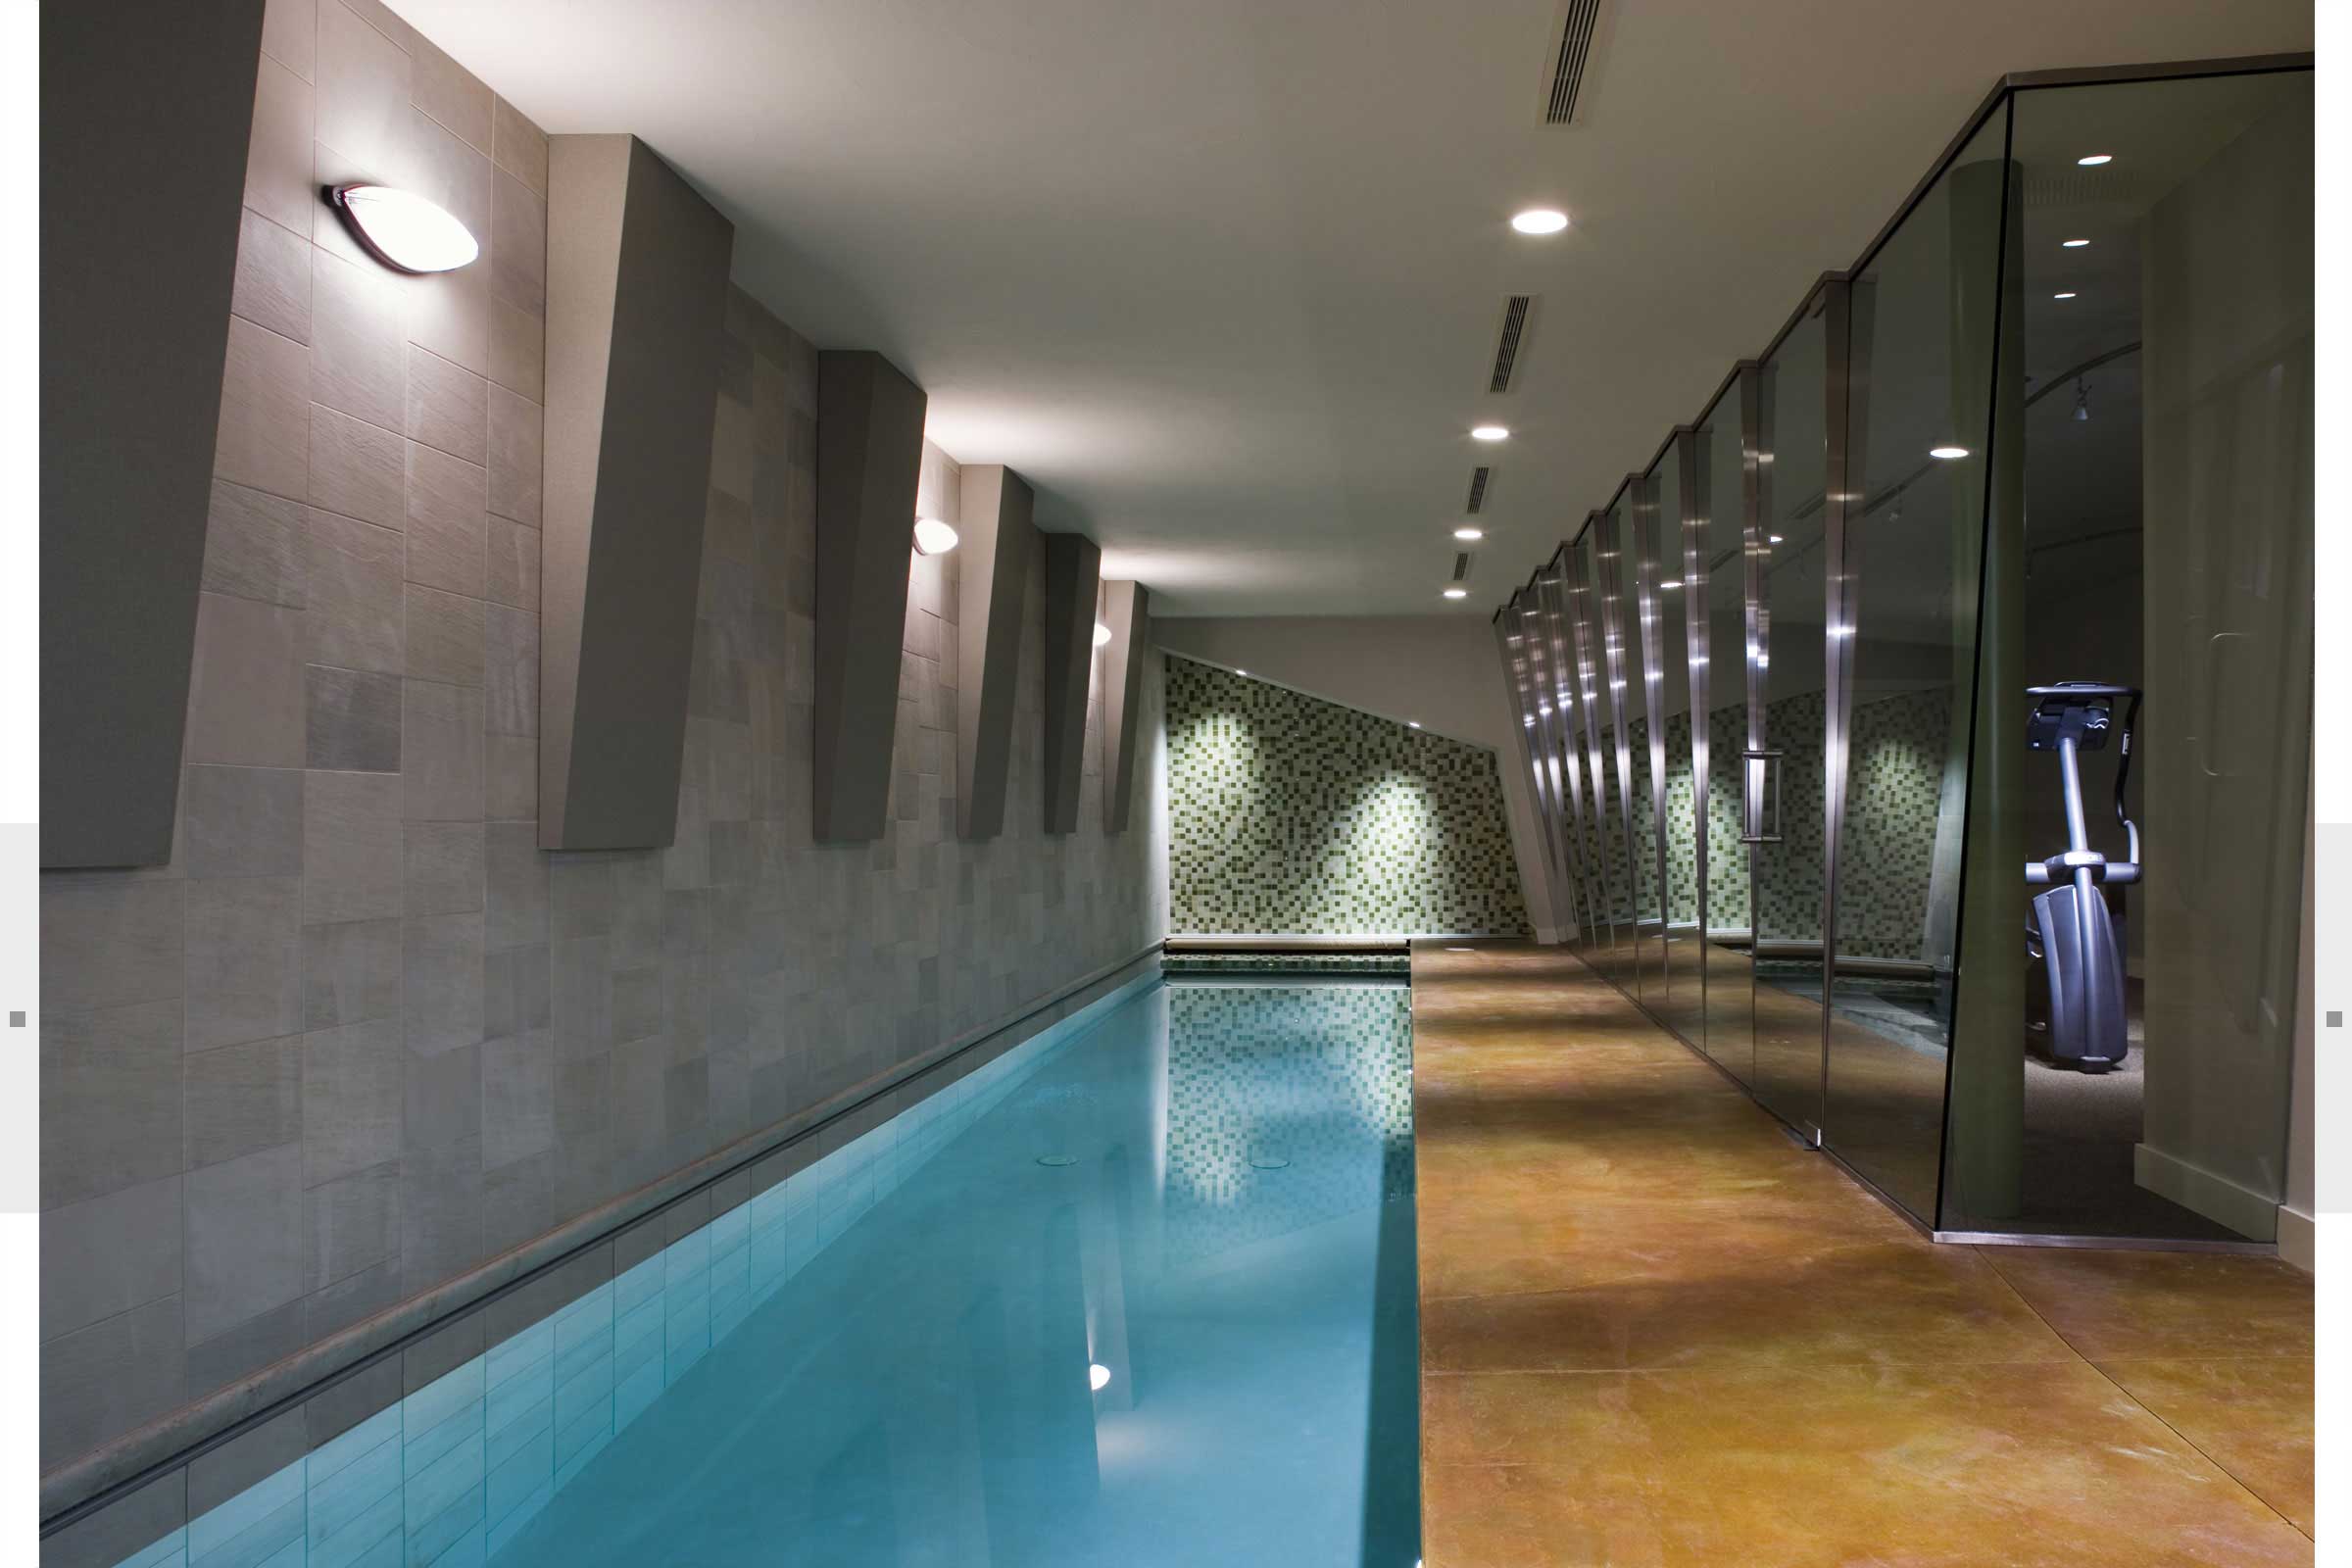 indoor lap pool and exercise room in home